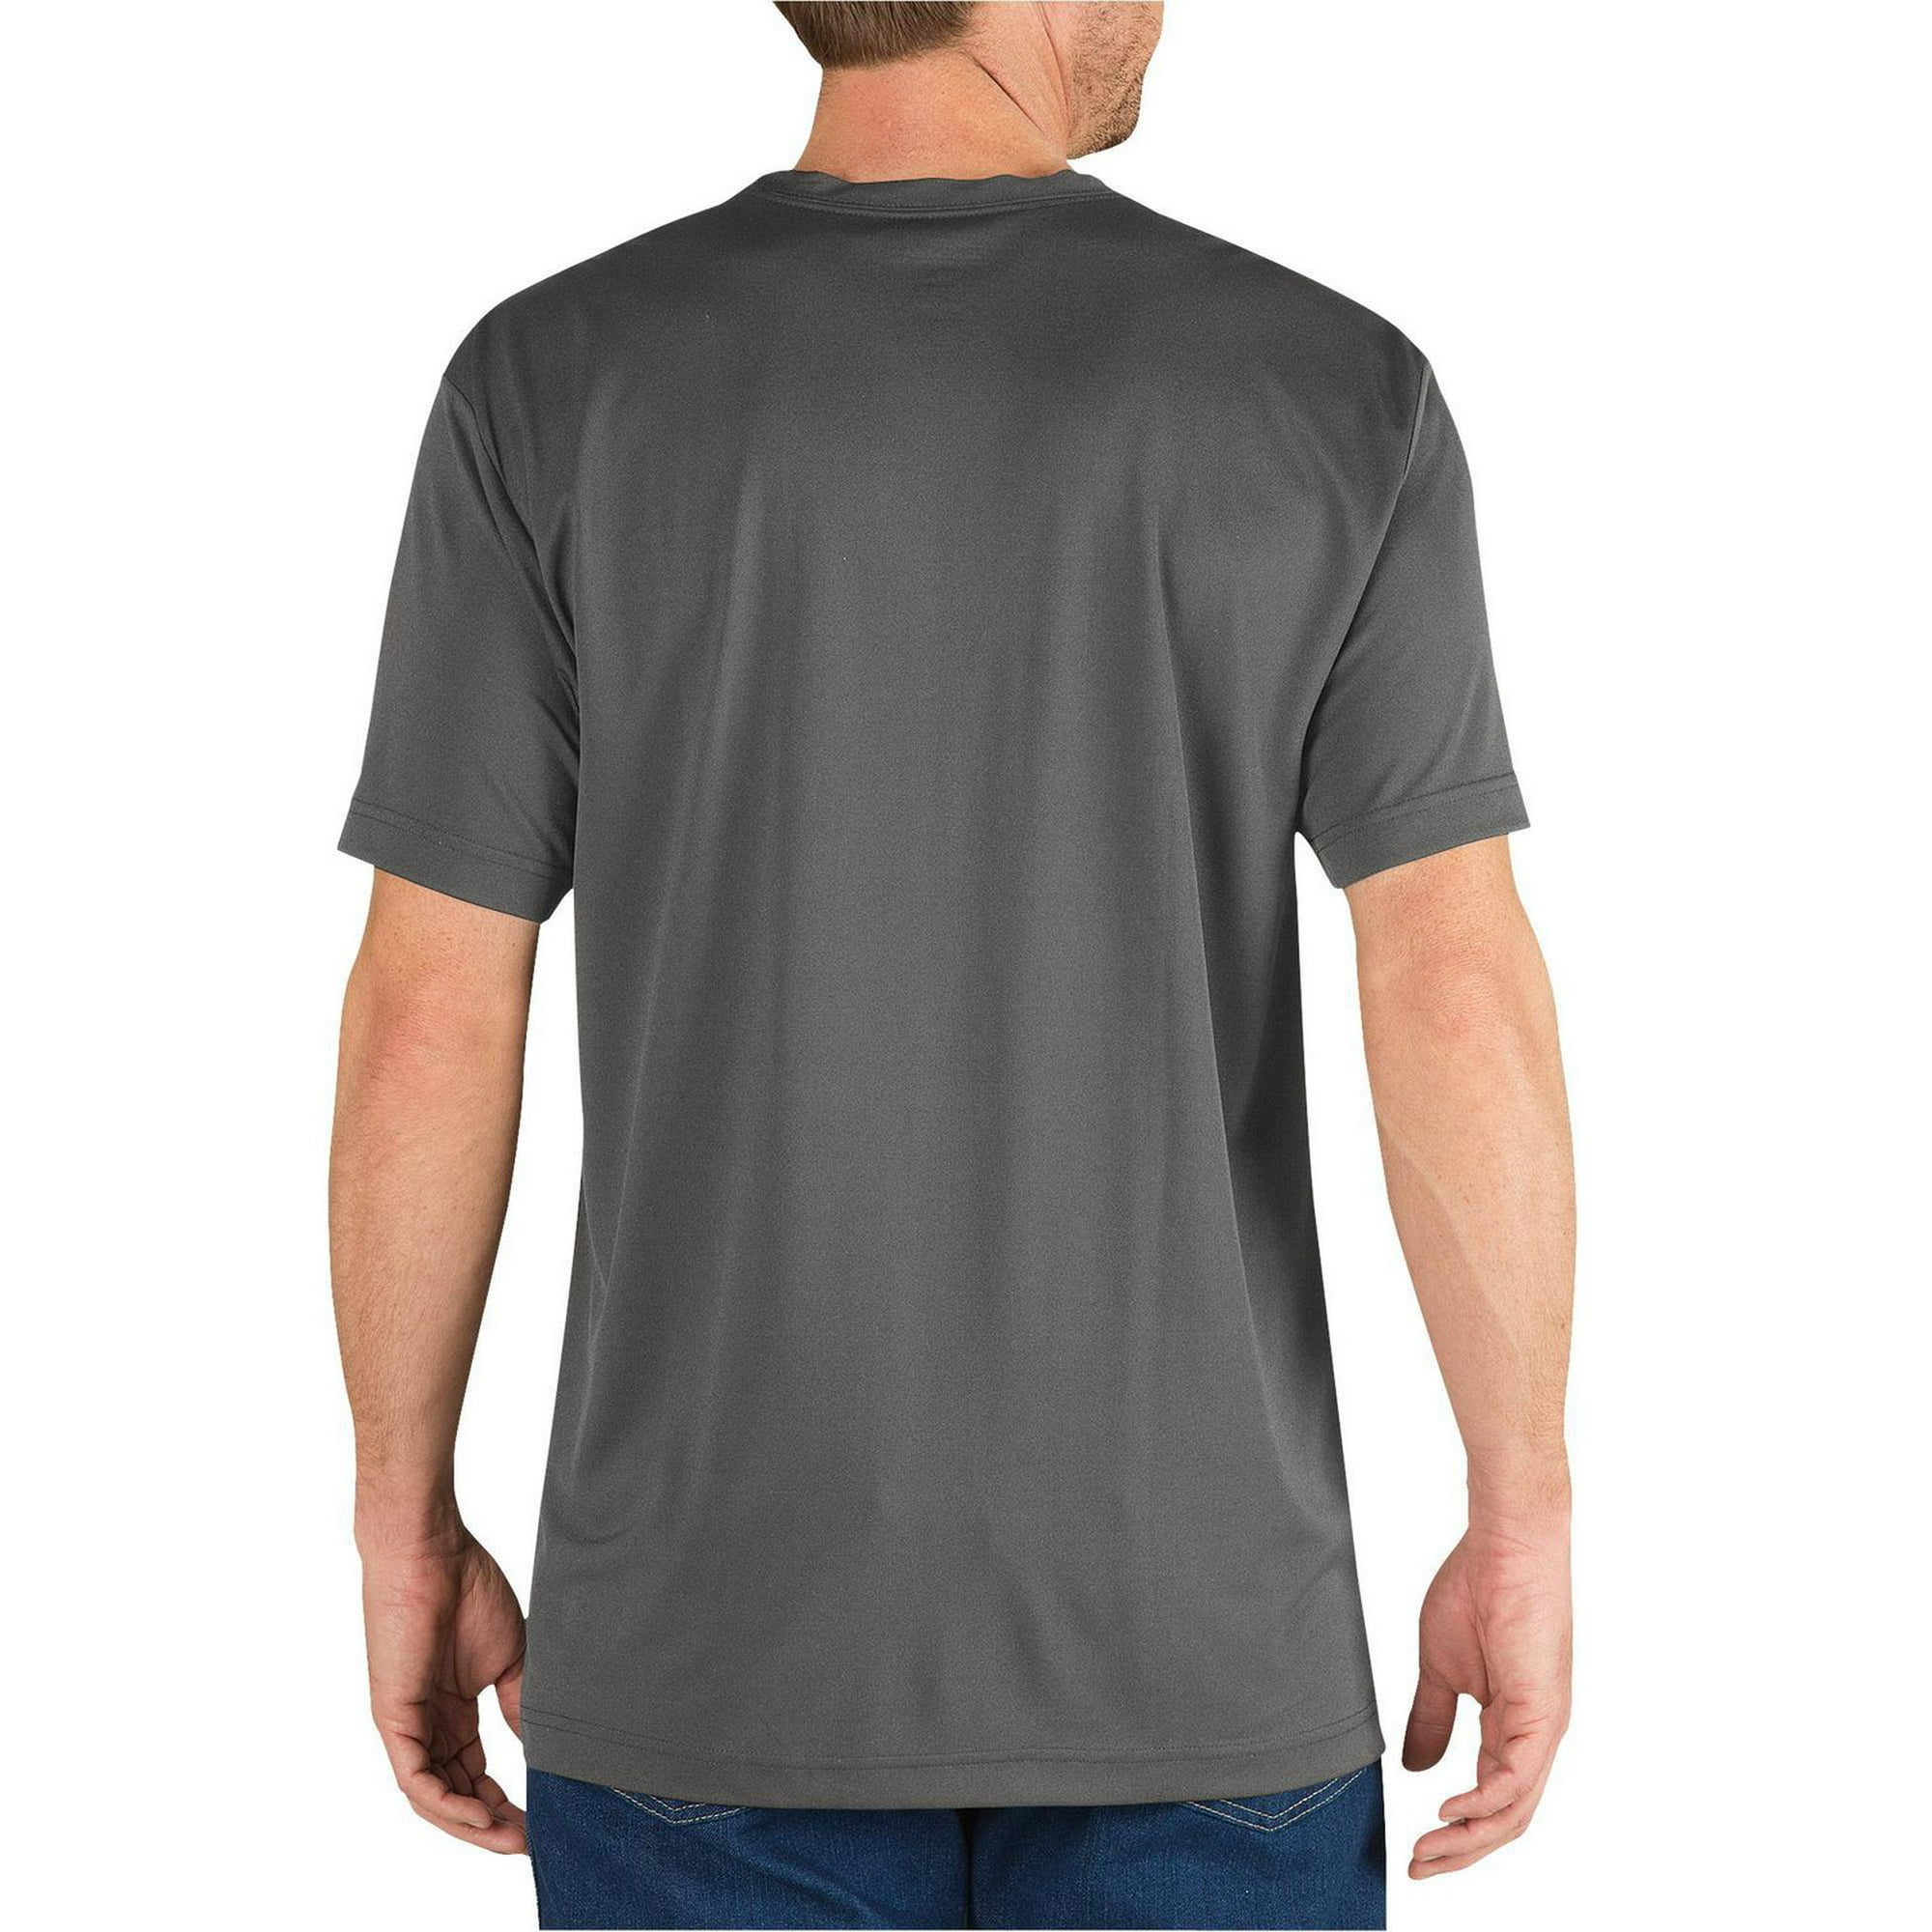 Dickies mens Short Sleeve Performance Cooling Tee T Shirt, Heather Gray,  Small US